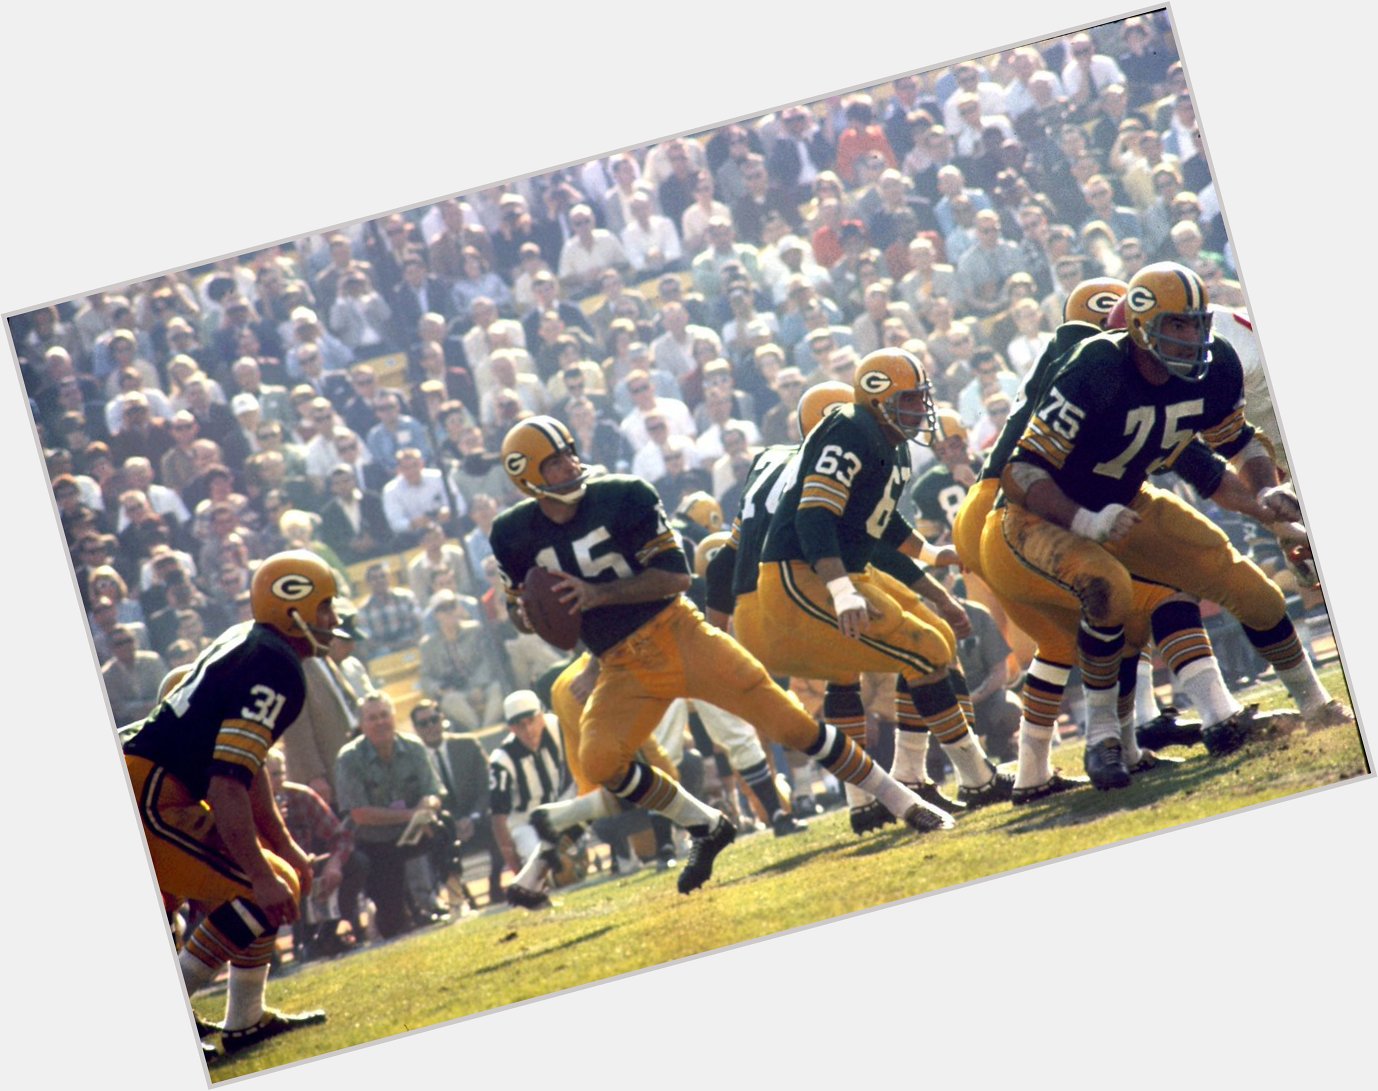 Happy 83rd birthday to the Hall of Fame QB Bart Starr! 